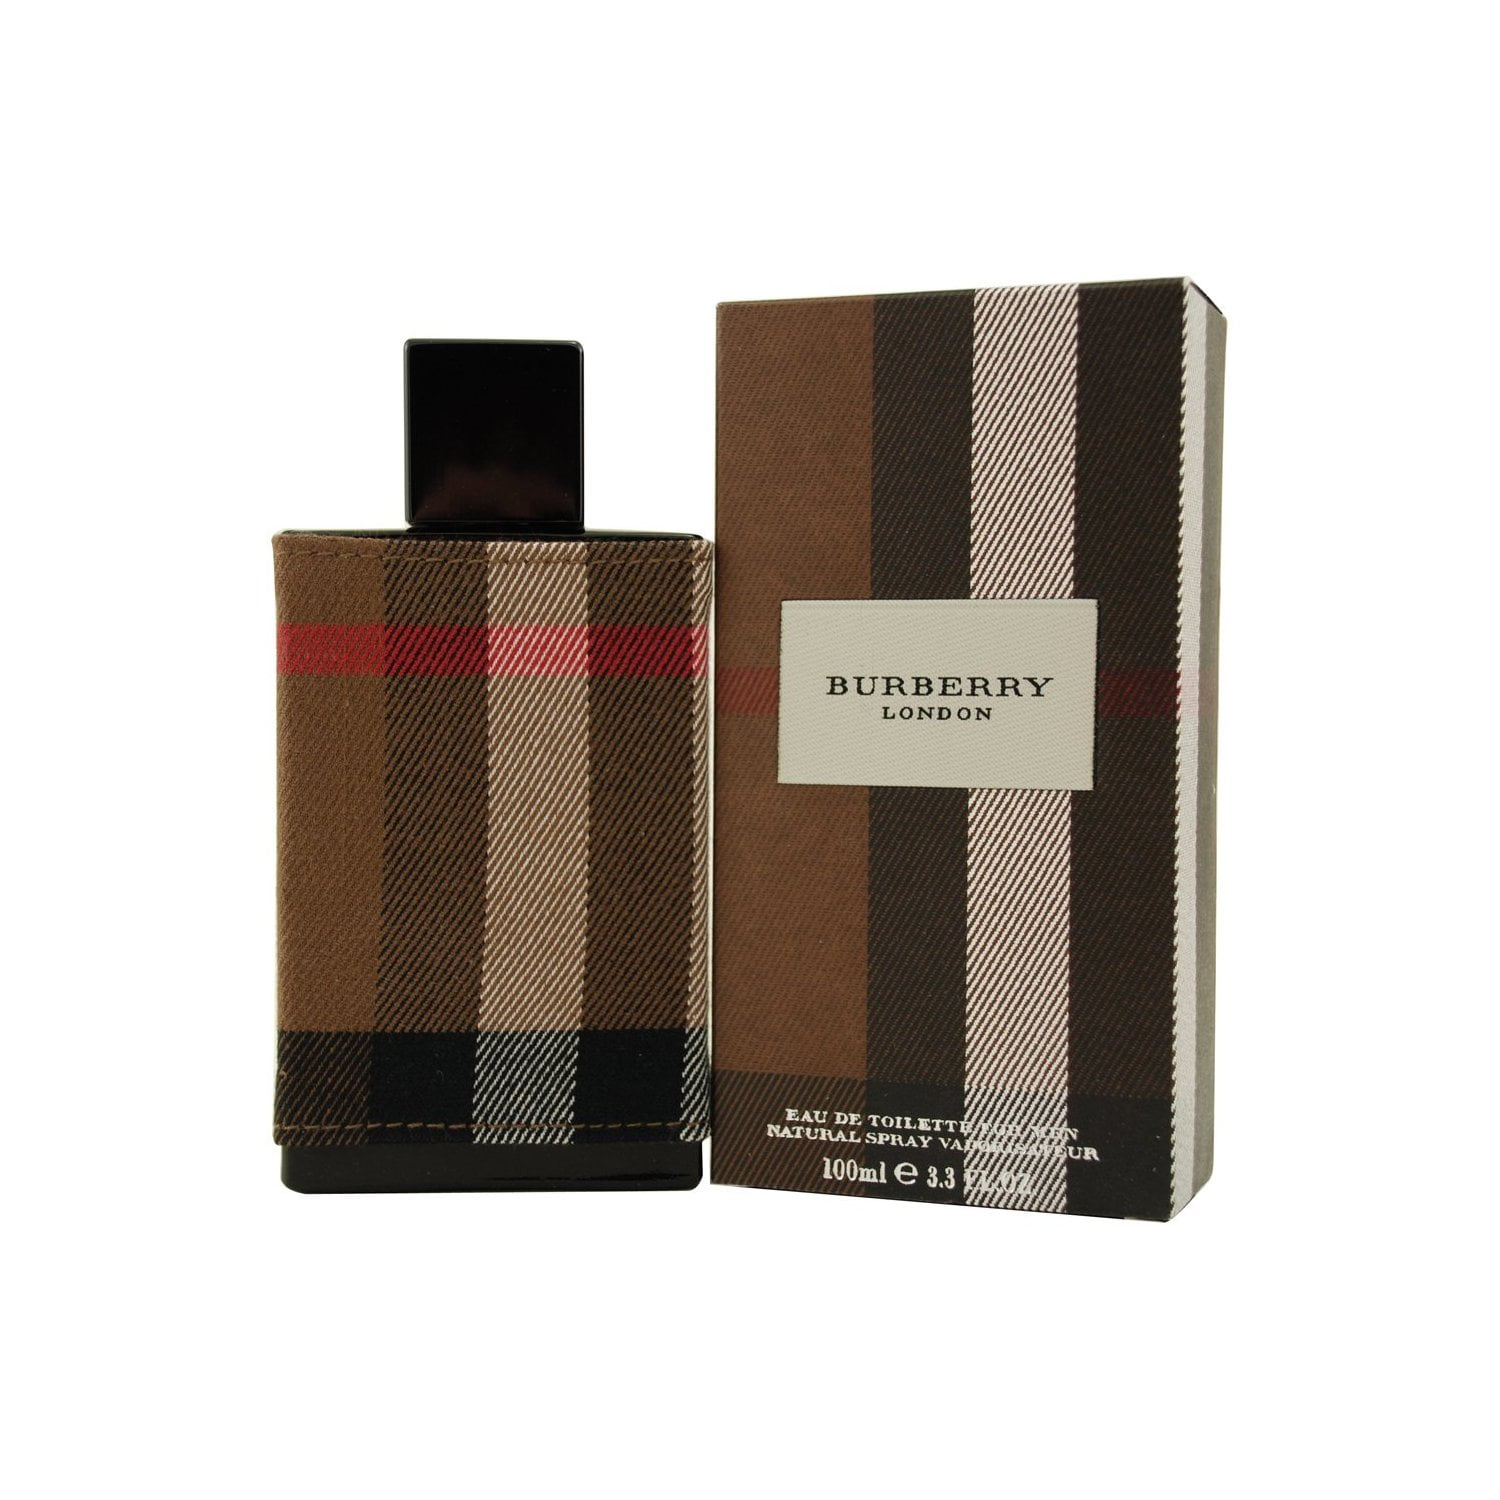 burberry london cologne macy's